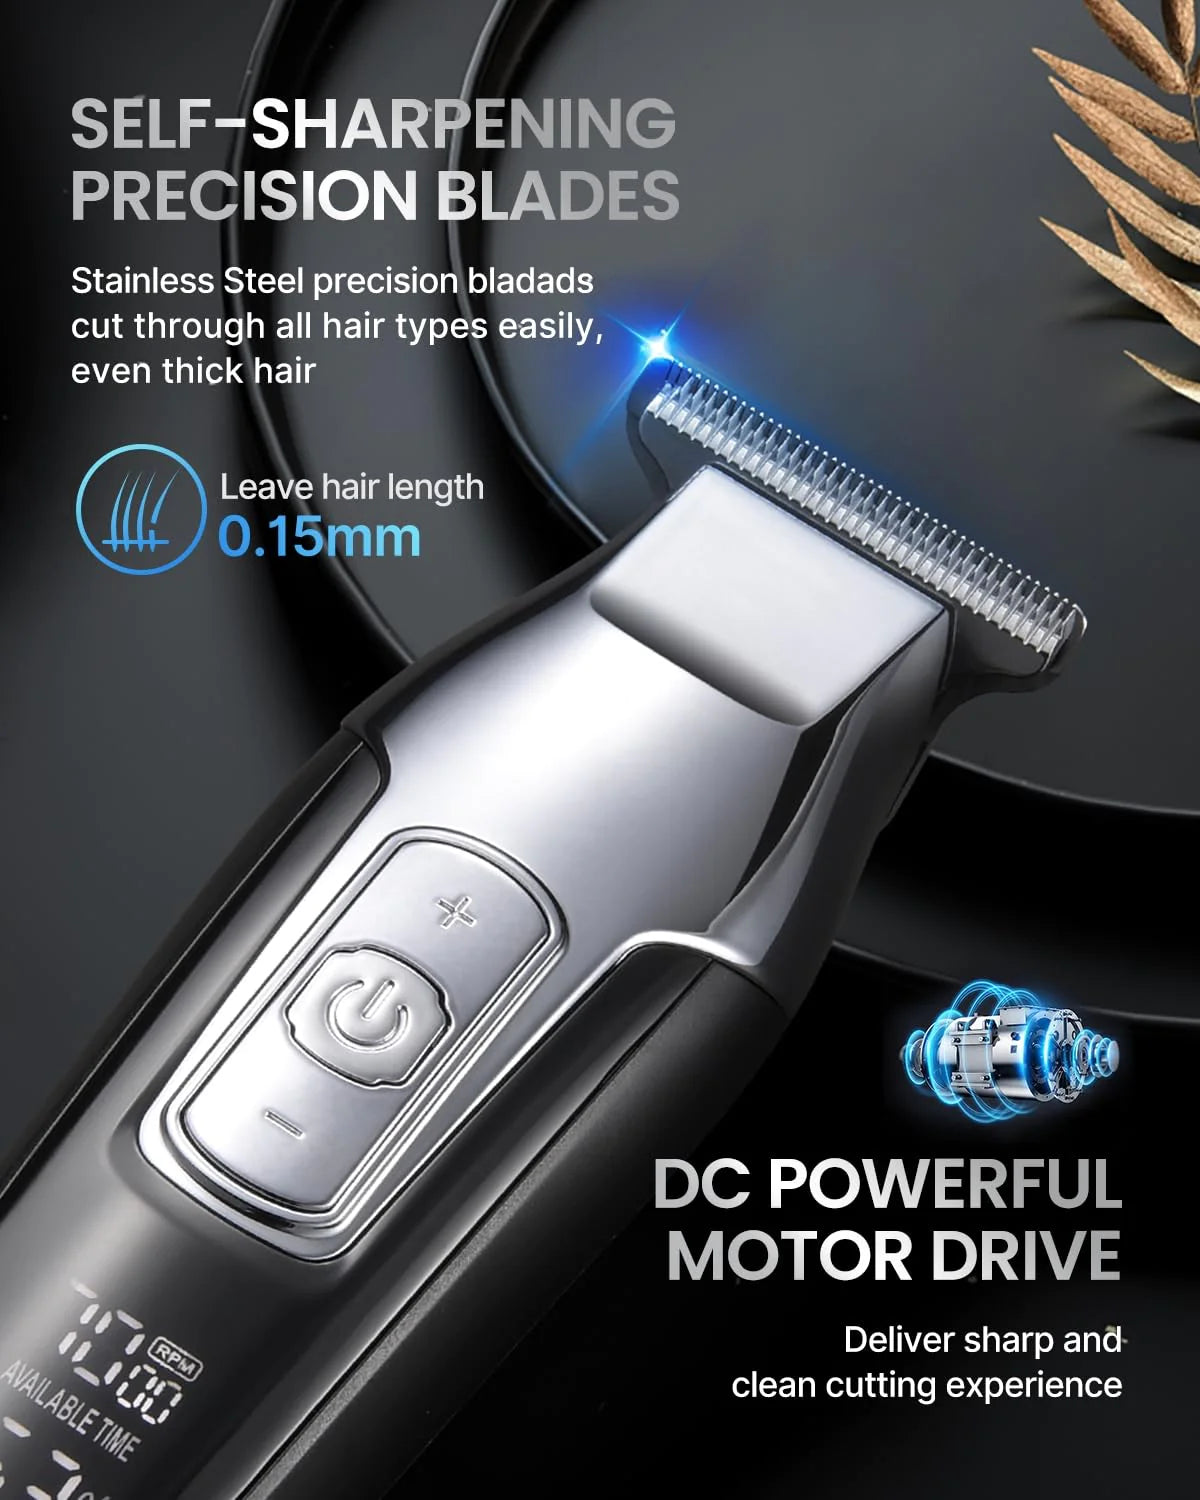 A close-up of the Renpho EU Professional Cordless Hair Trimmer with self-sharpening precision blades. The cordless hair clippers feature stainless steel blades, a power button, and an LED display. The image highlights a cutting length of 0.15mm and mentions a powerful high-speed motor drive for a clean cutting experience.